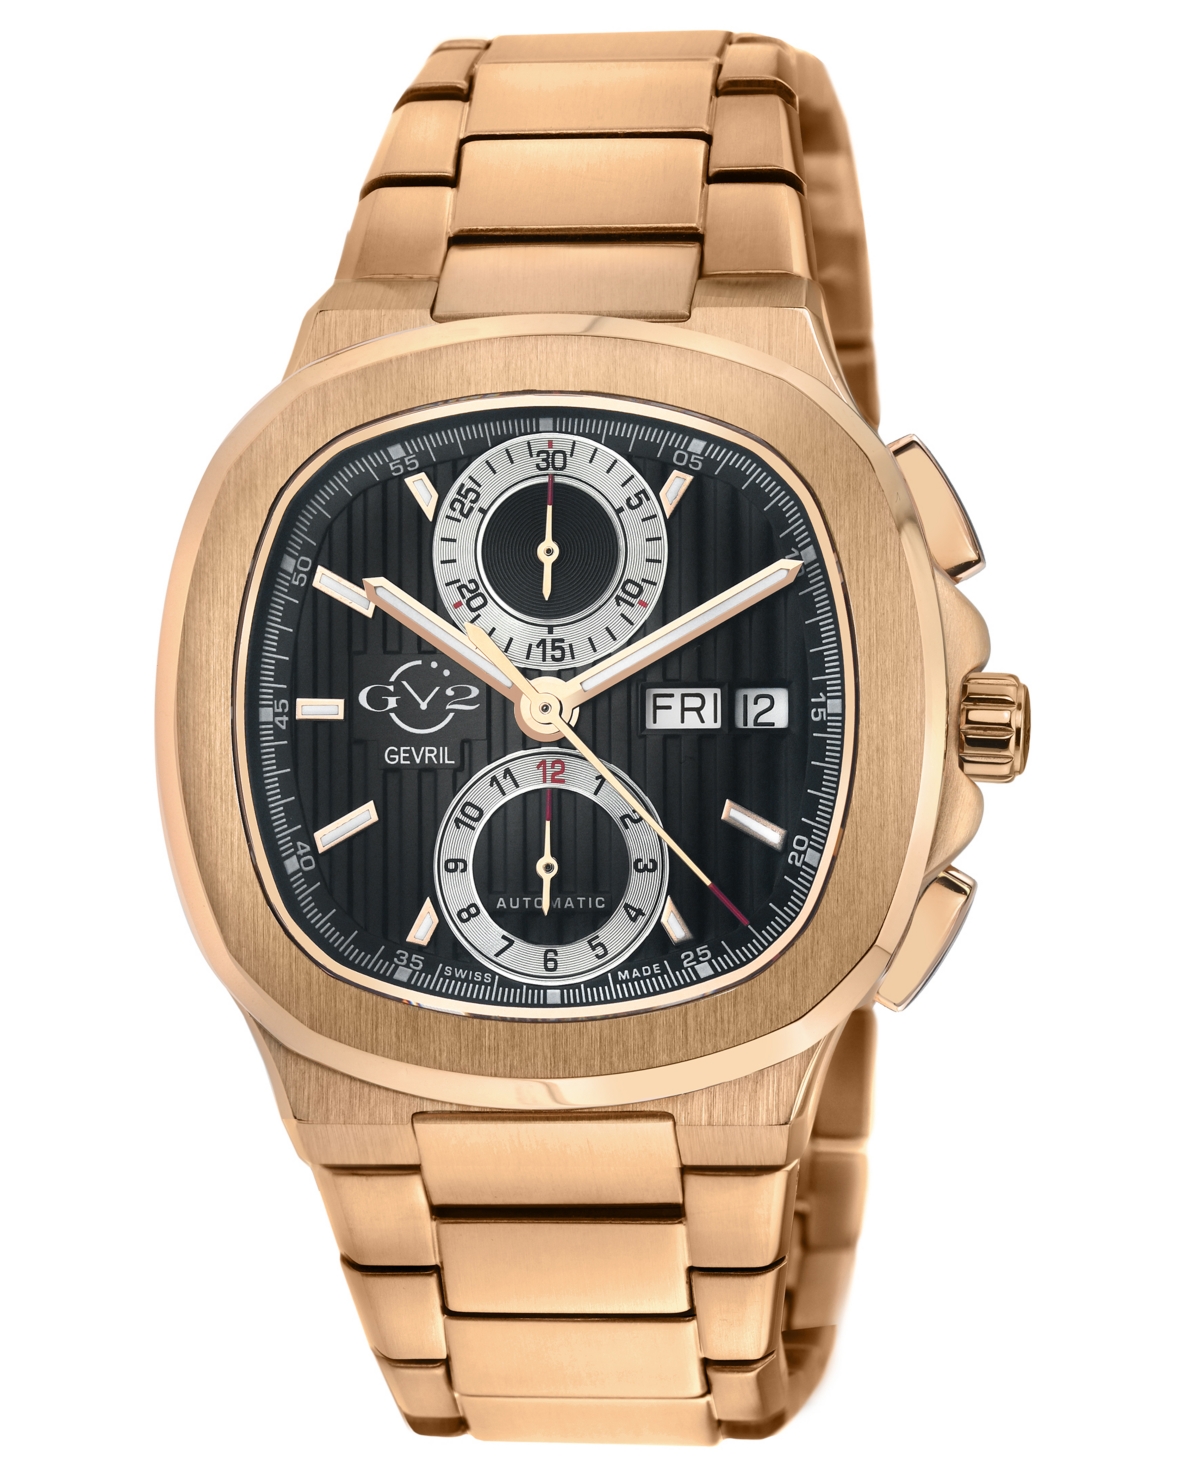 Gv2 By Gevril Men's Potente Chronograph Swiss Automatic Rose Stainless Steel Watch 40mm In Black / Gold Tone / Rose / Rose Gold Tone